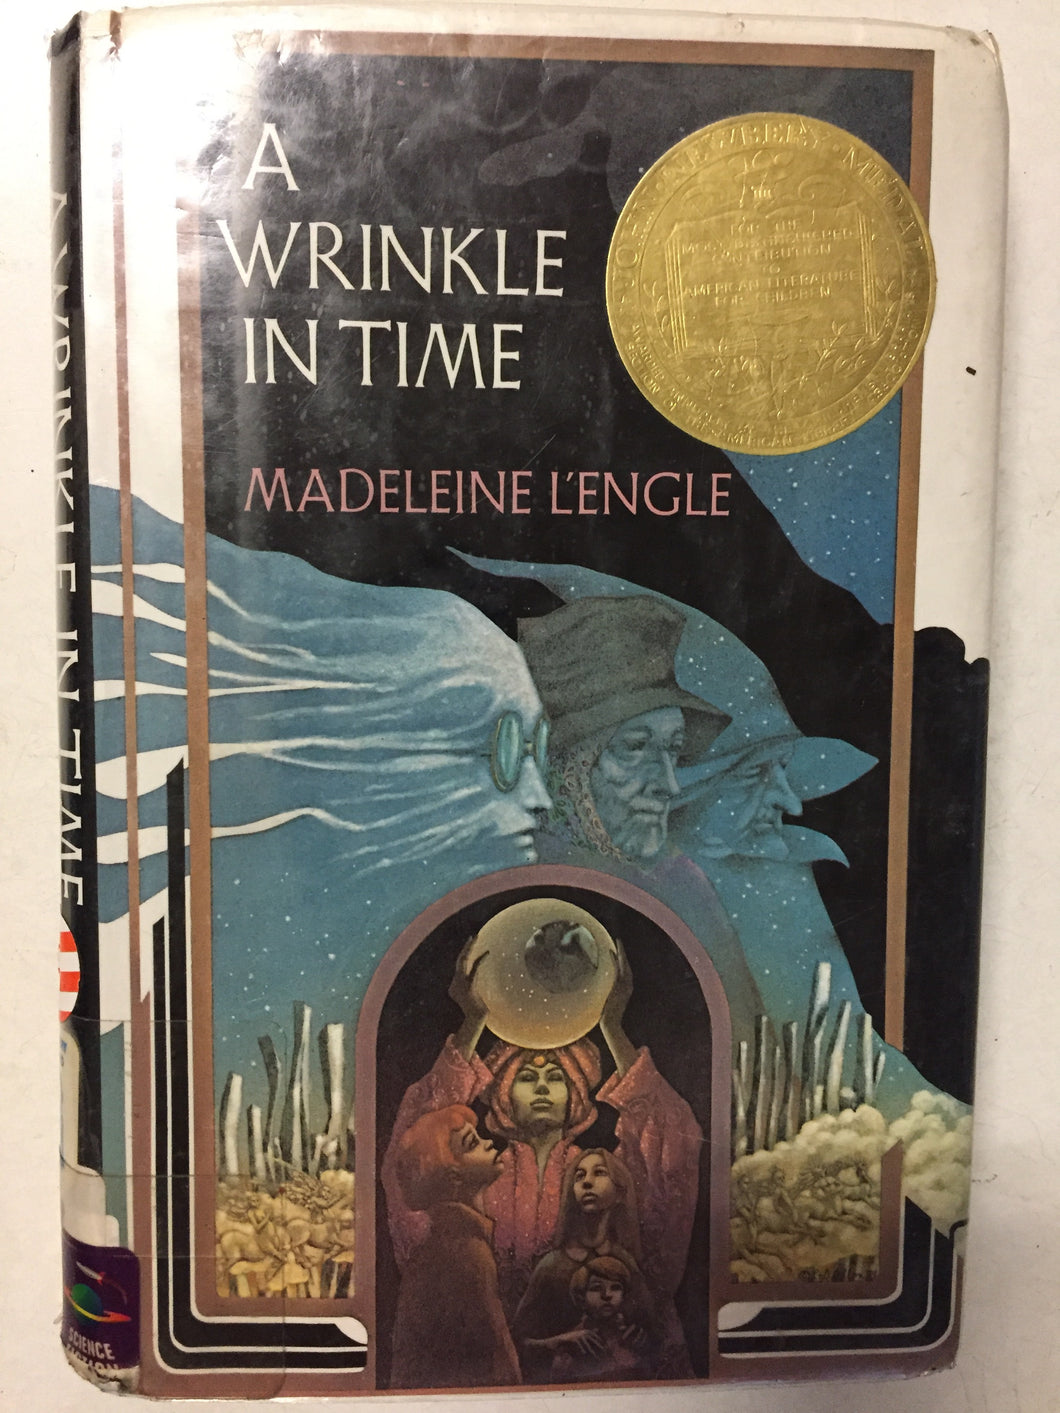 A Wrinkle in Time - Slick Cat Books 